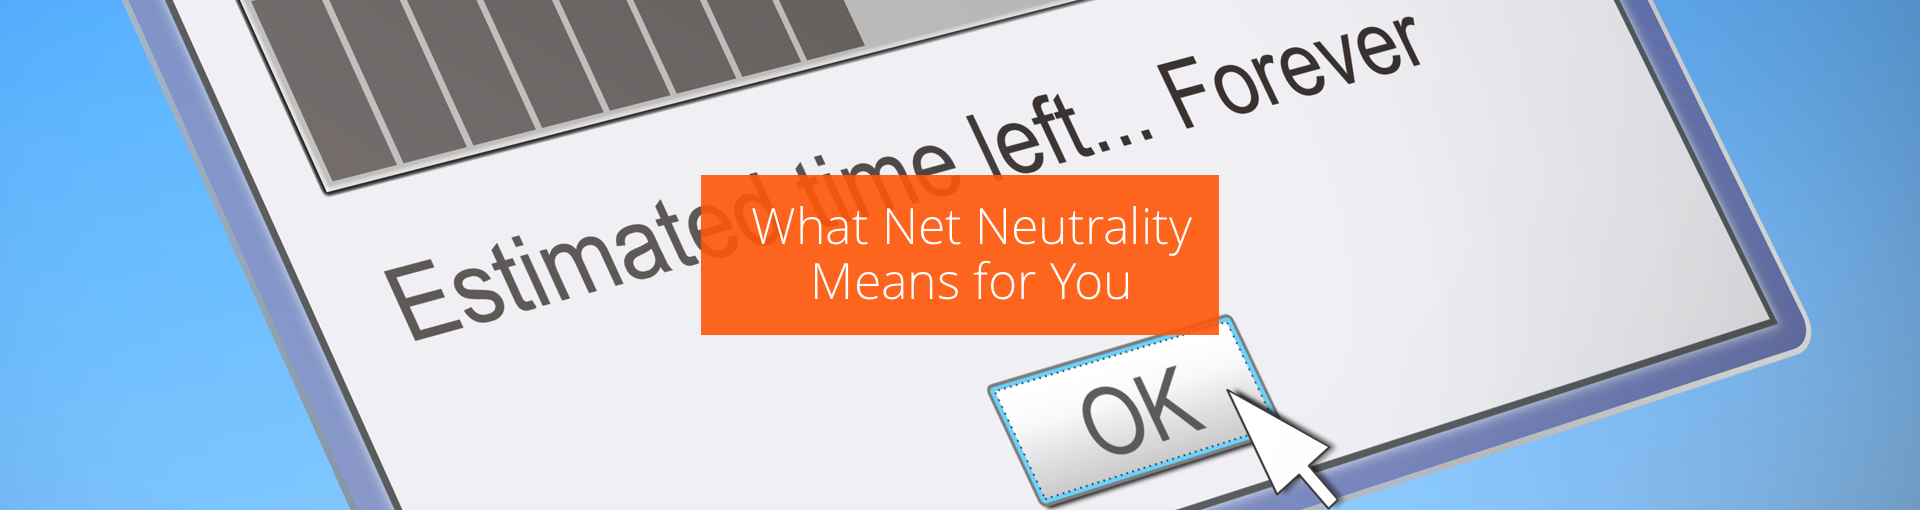 What Net Neutrality Means for You Featured Image